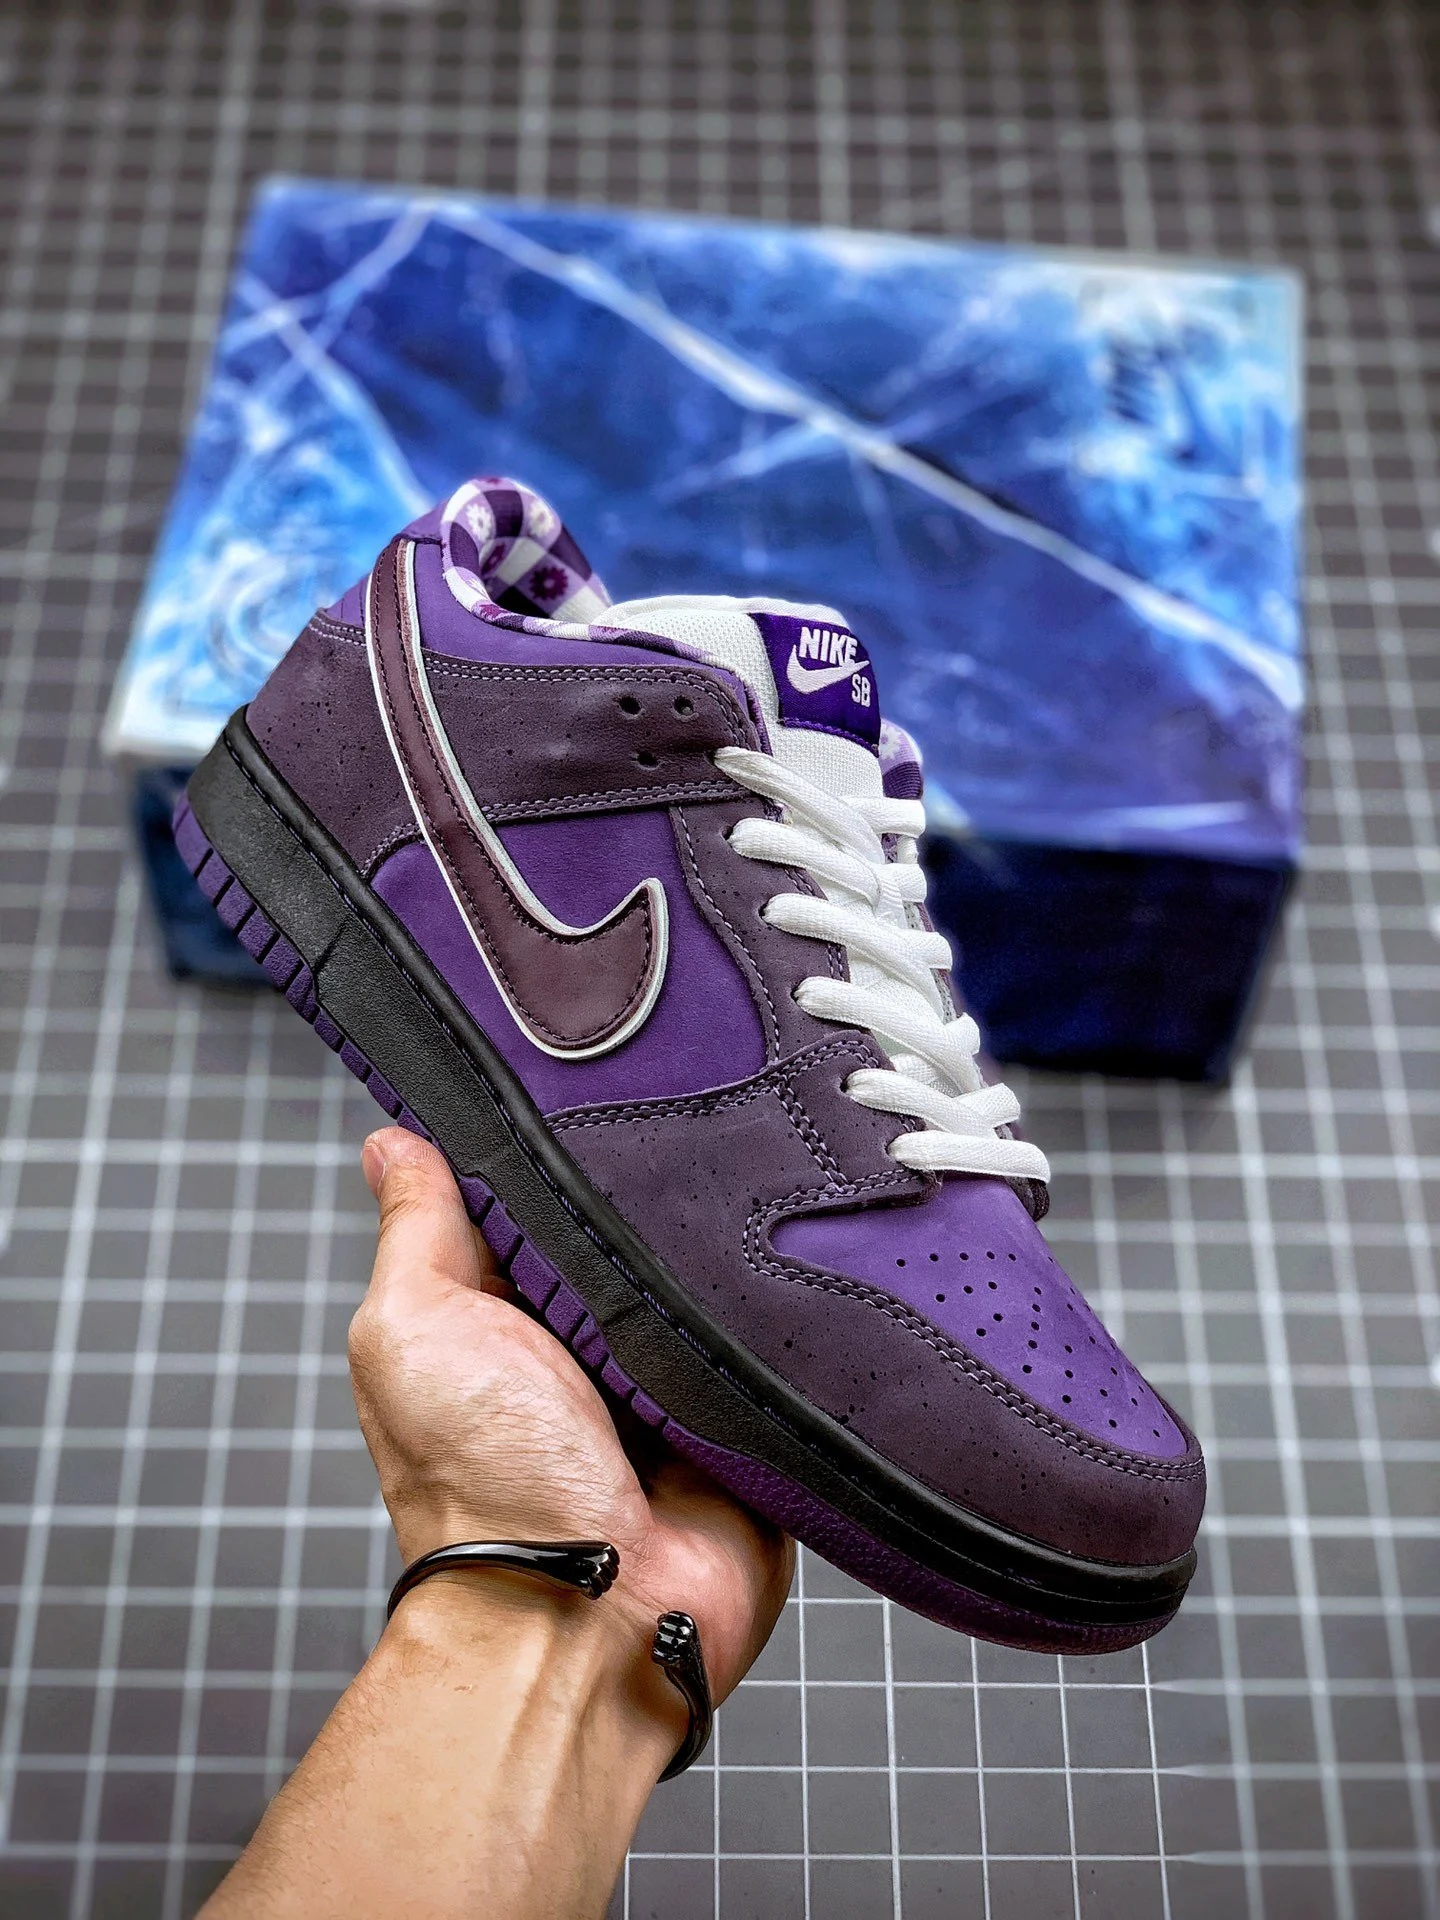 Concepts x Nike SB Dunk Low Purple Lobster BV1310-555 For Sale